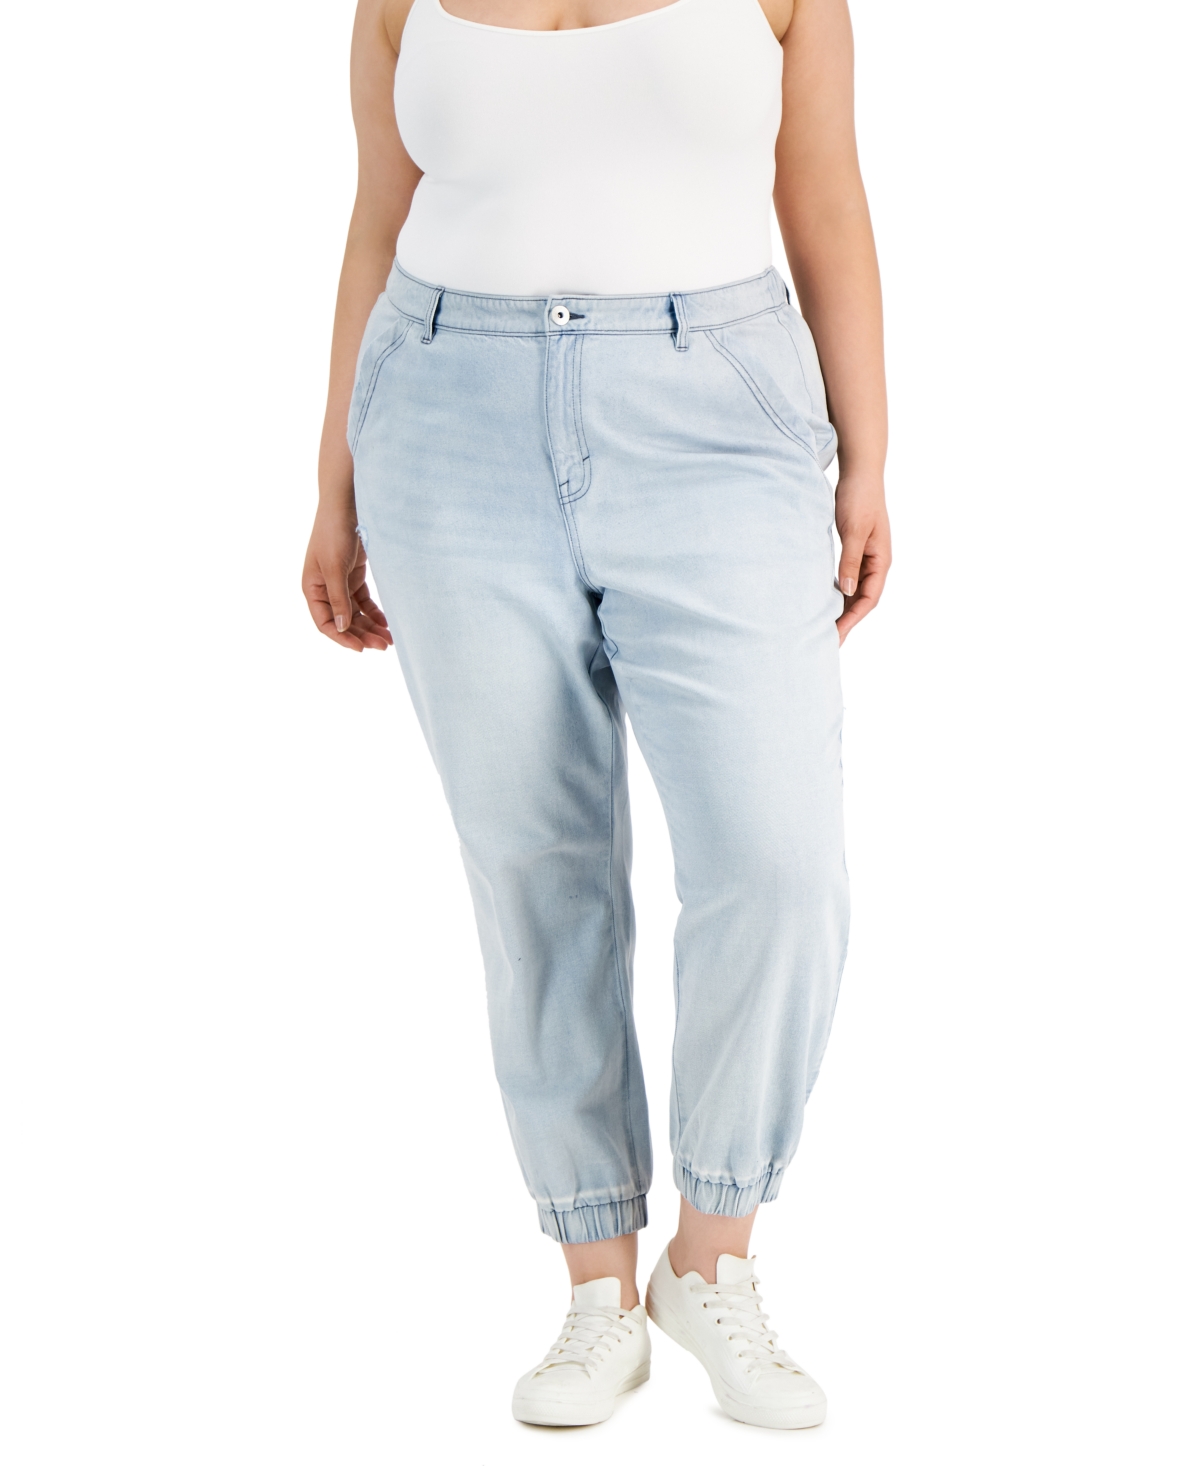 Style & Co Plus Size Utility Denim Jogger Pants, Created for Macy's